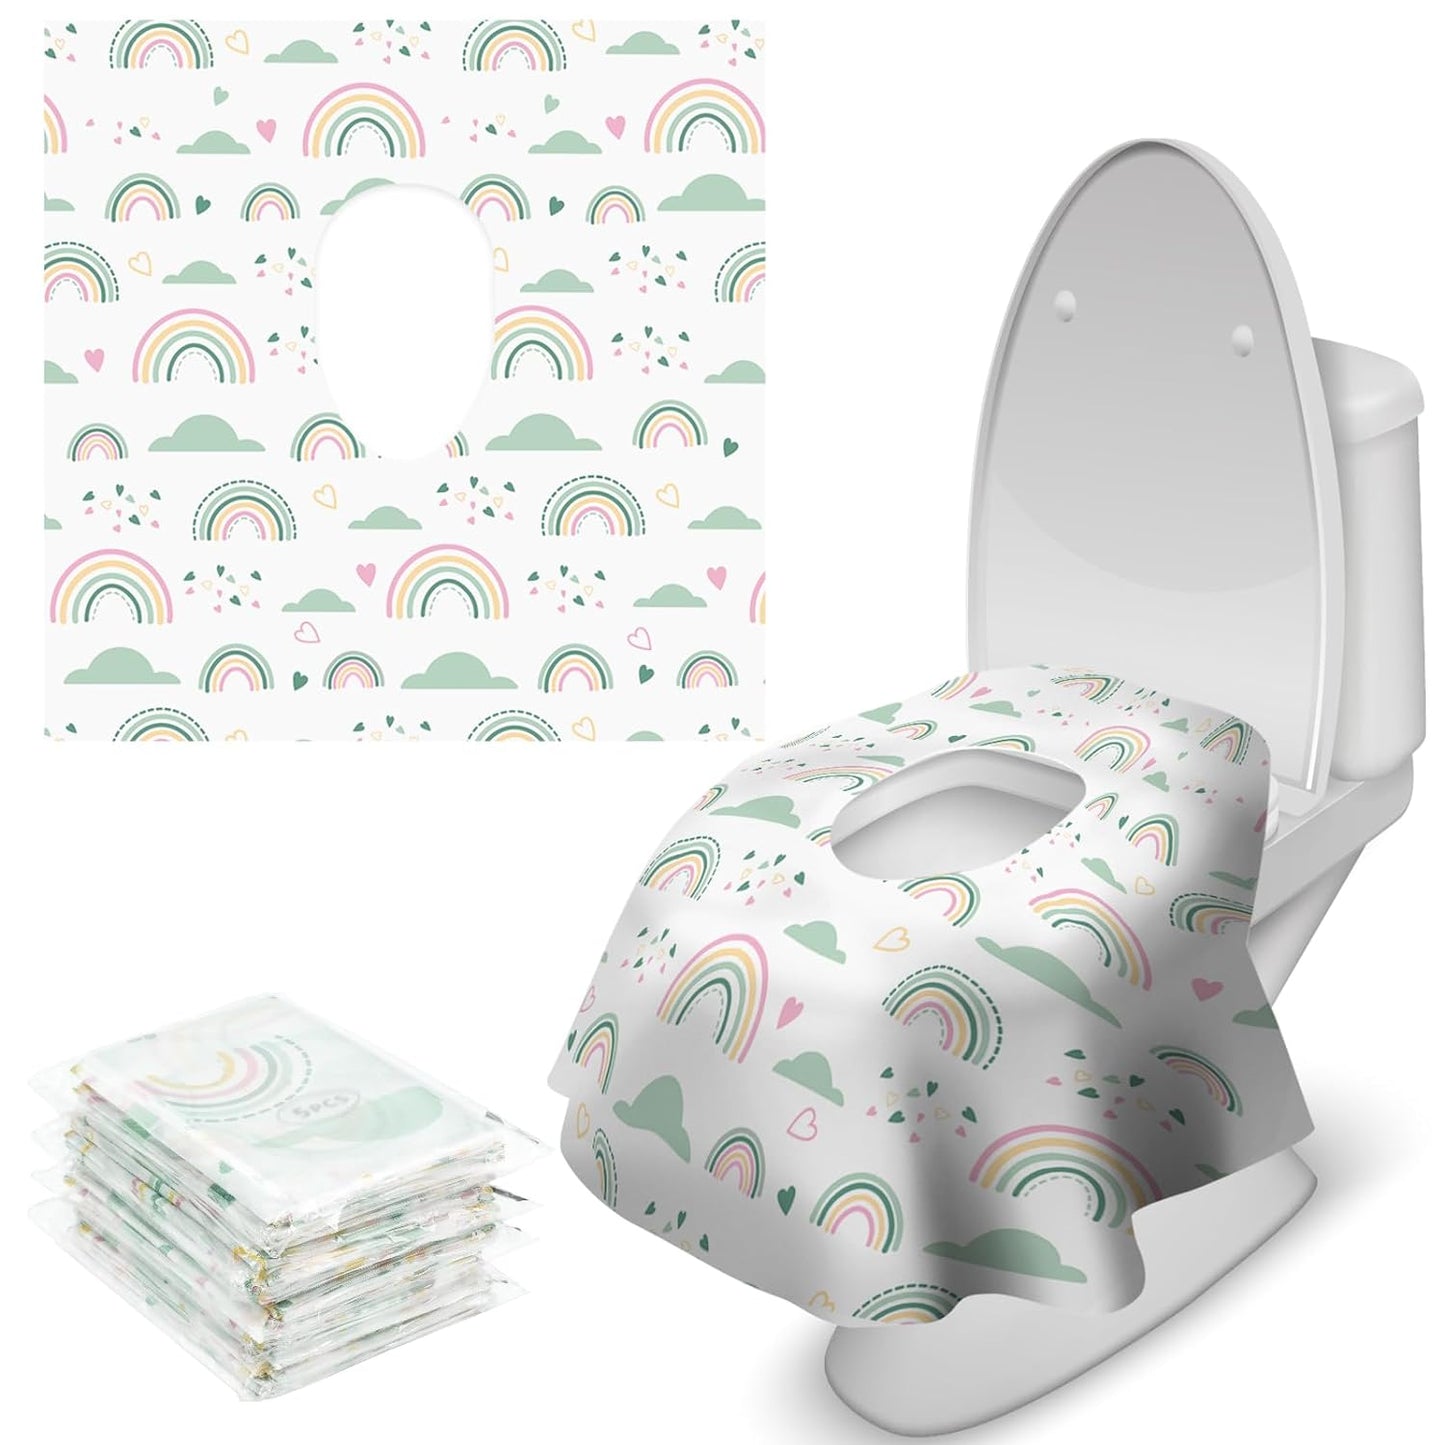 Toilet Seat Covers Disposable, 20 Pcs Extra Large Waterproof Toilet Cover for Toddlers & Adults